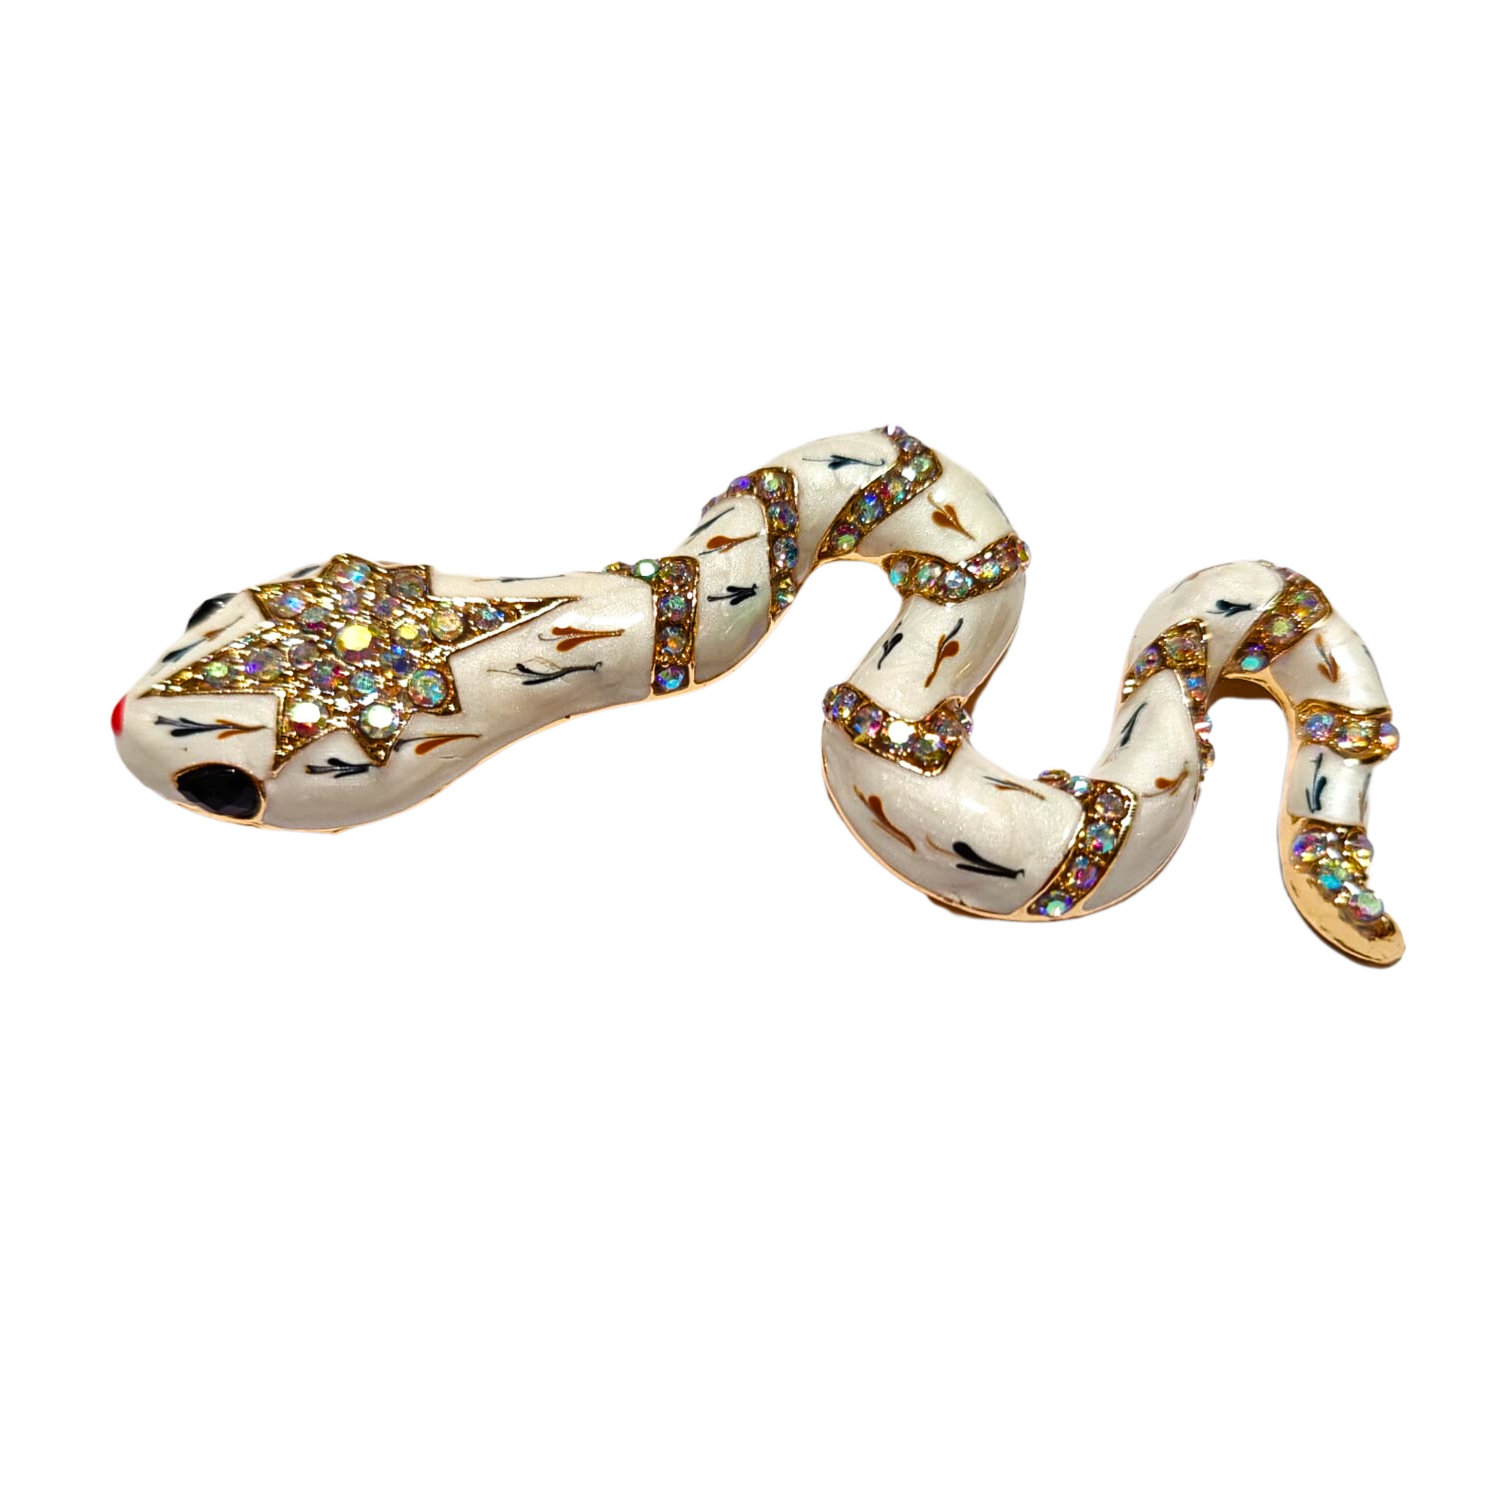 View 4: White Snake With Jewels Lapel Pin